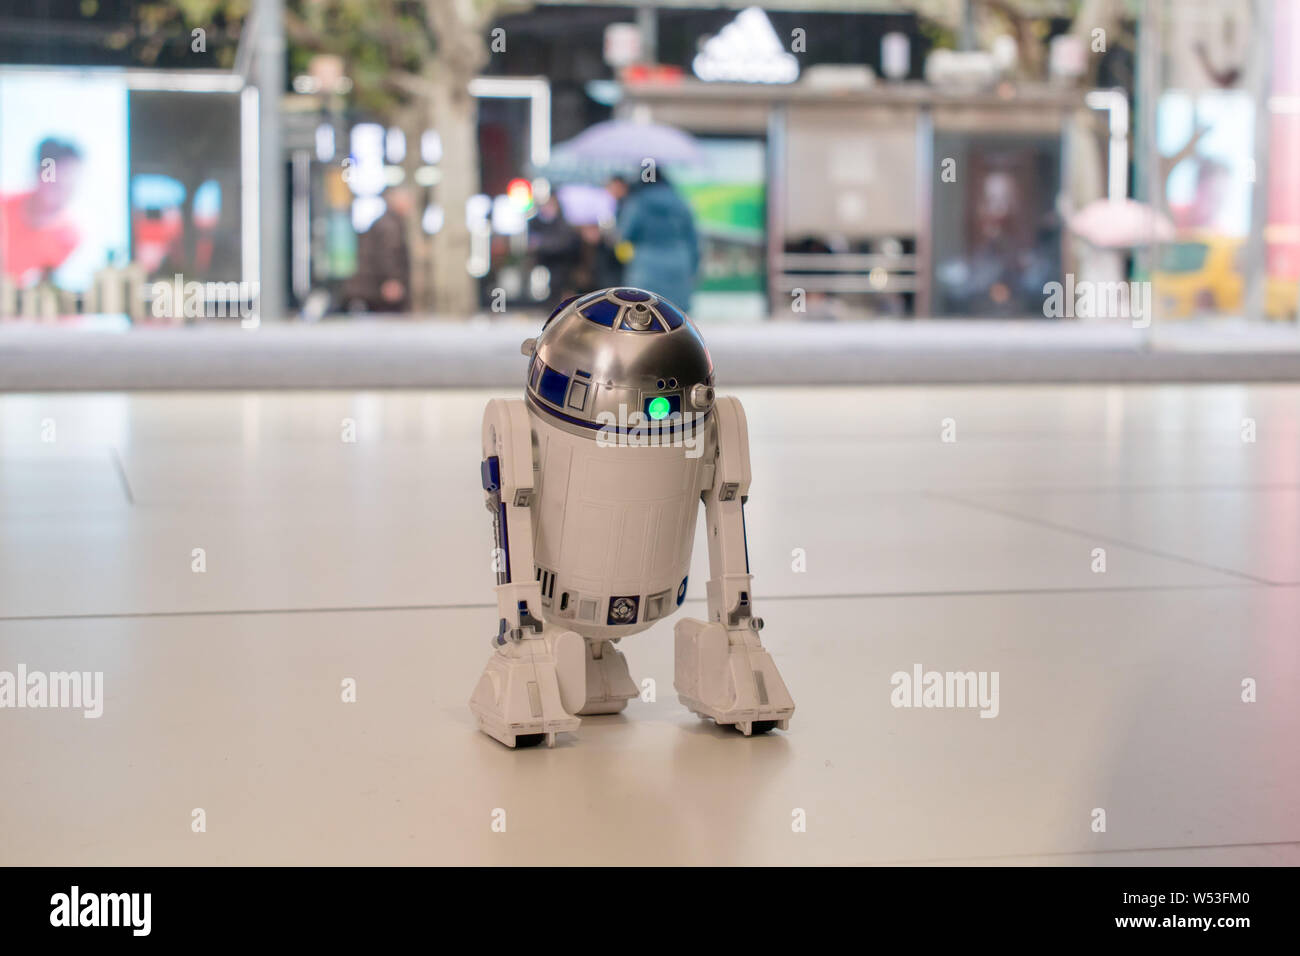 A robot featuring the shape of Star Wars Interactive R2D2 Astromech Droid  Robot patrols at a shopping mall on Huaihai Road in Shanghai, China, 9  Janua Stock Photo - Alamy